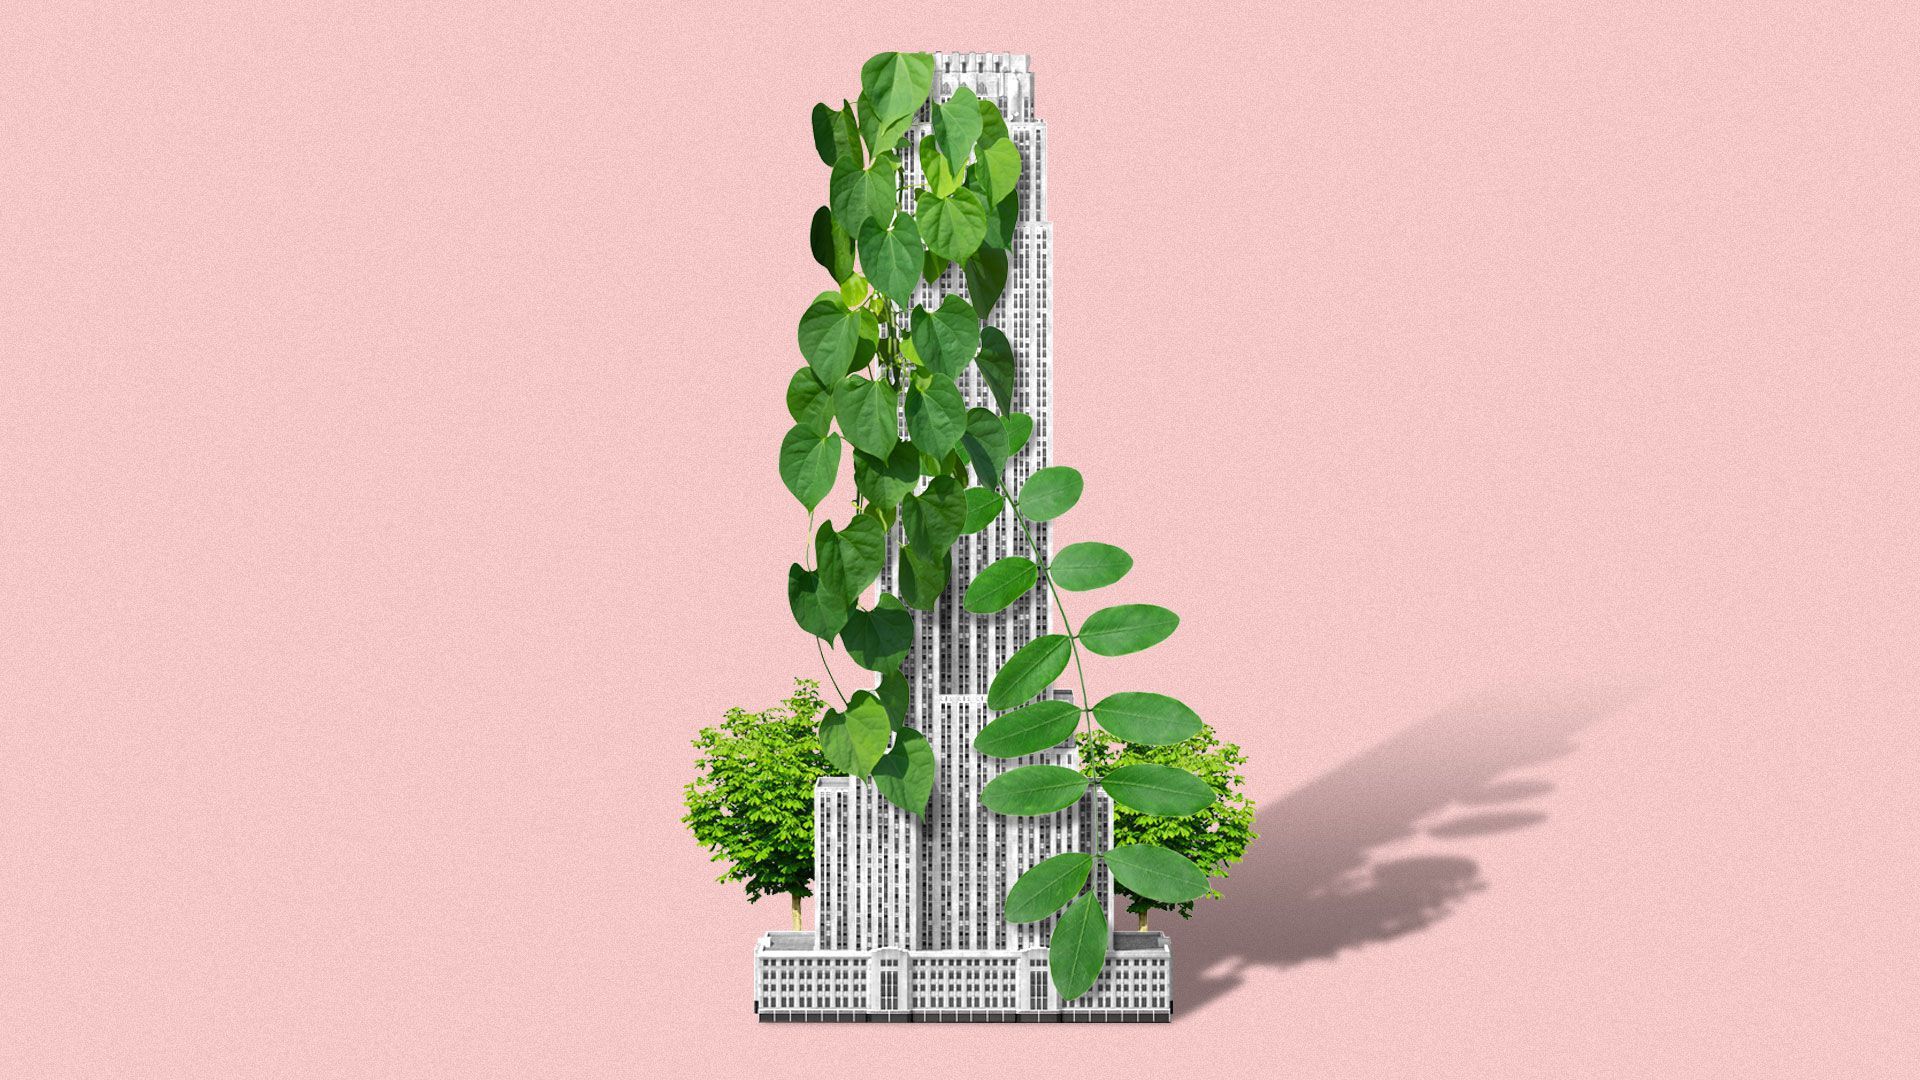 Illustration of a plant wrapped around a skyscraper.